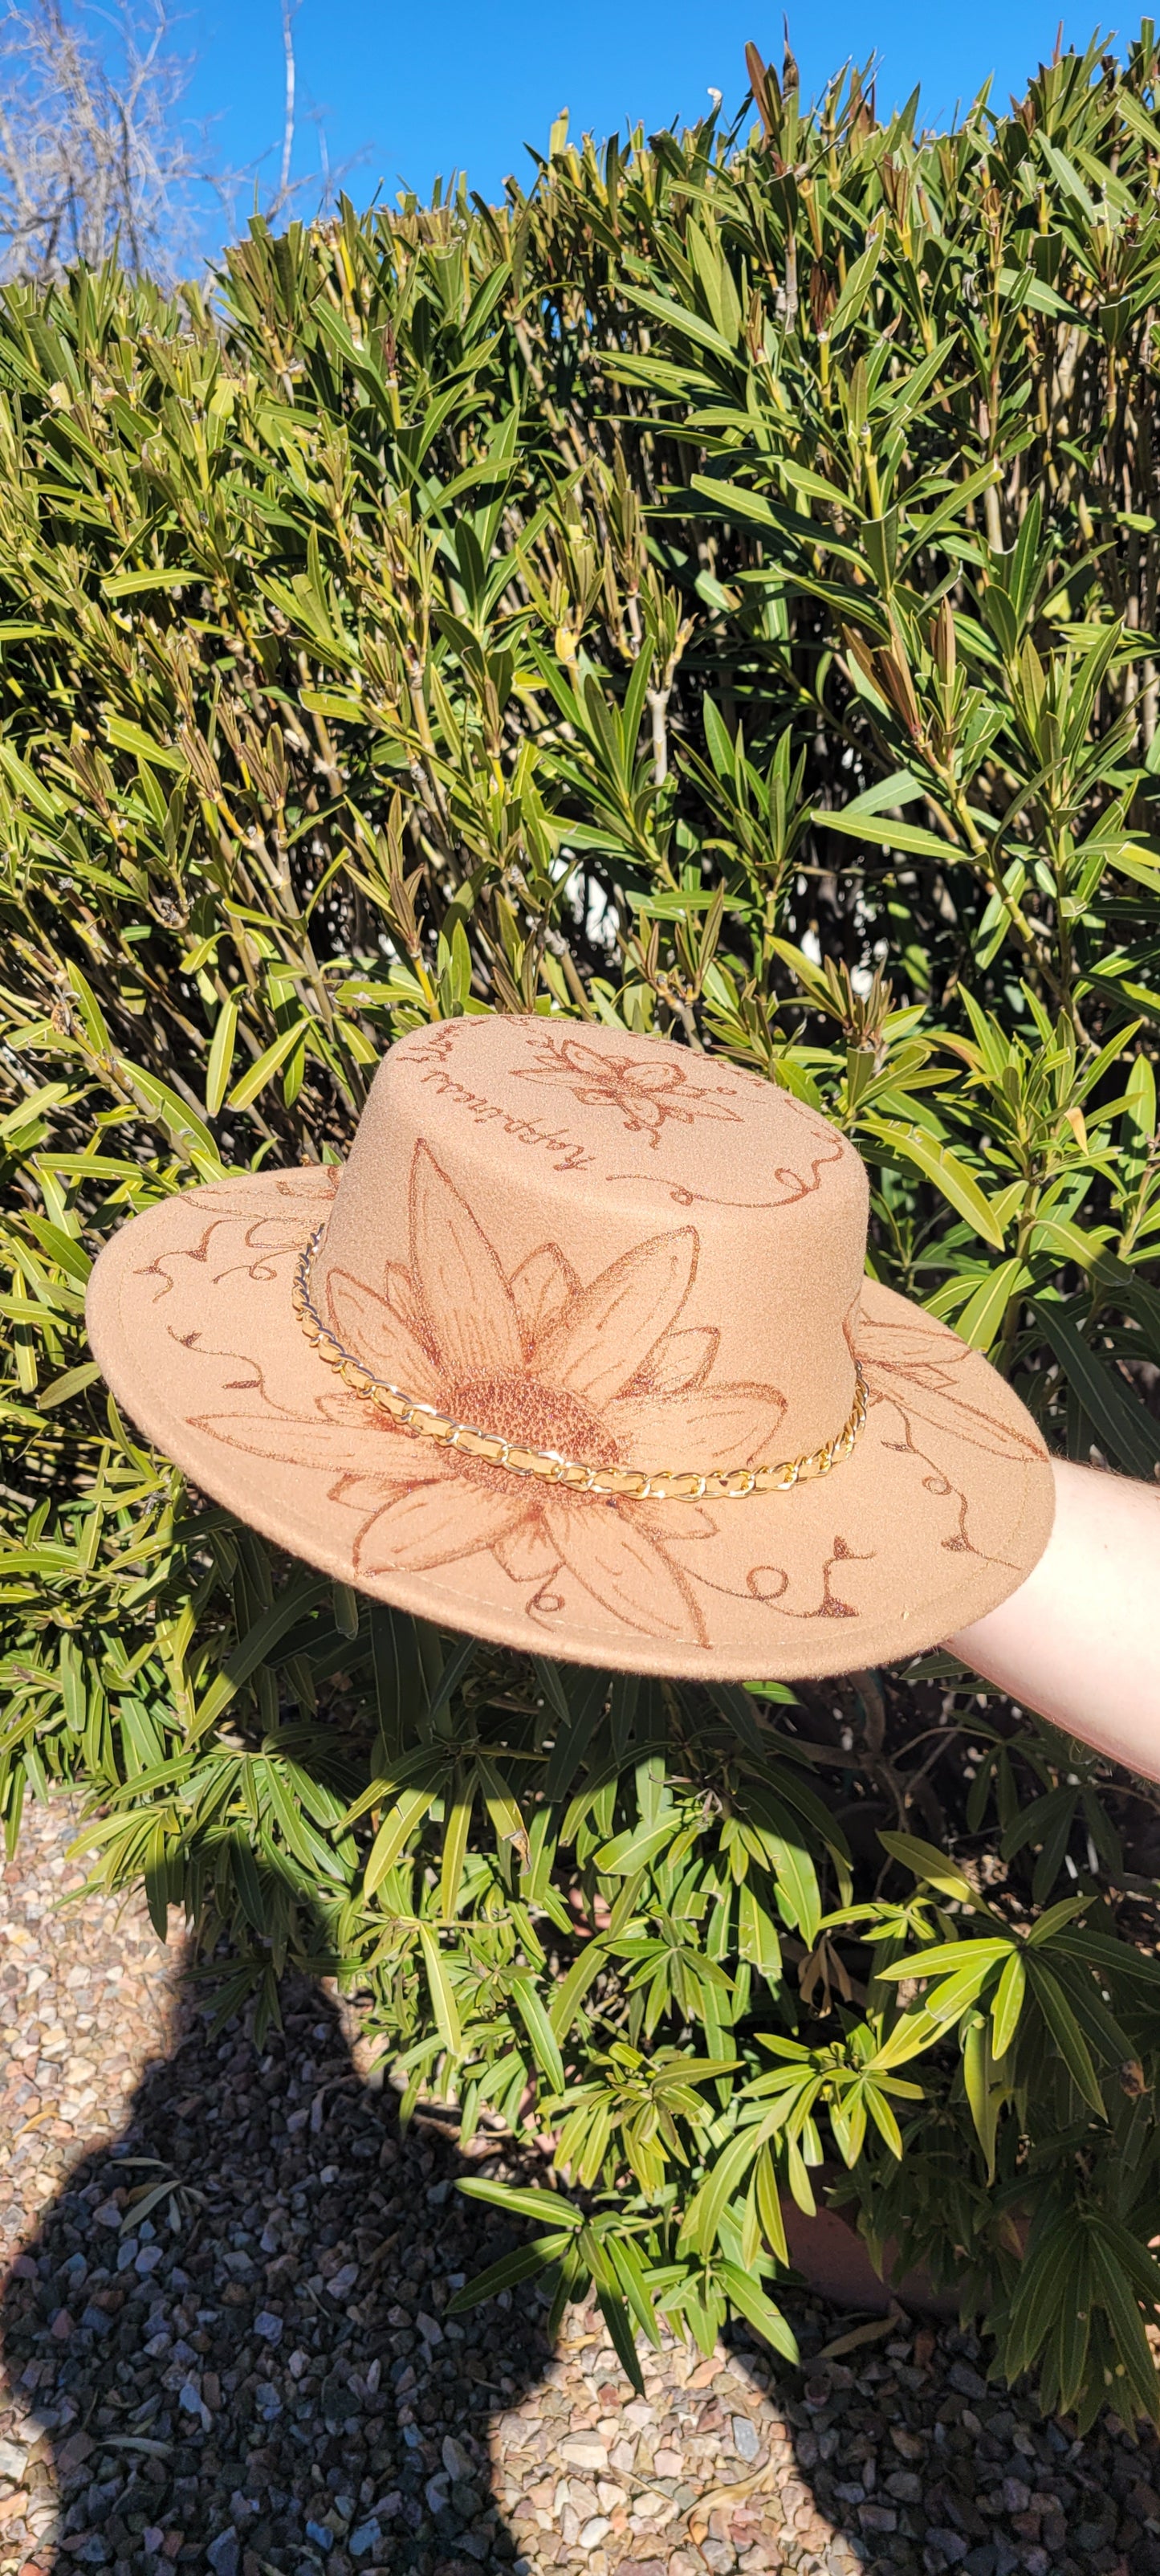 Features flowers, leaves & "Happiness Blooms From Within" engraving Chain with faux leather Felt hat Flat brim 100% polyester Ribbon drawstring for hat size adjustment Head Circumference: 24" Crown Height: 3.5" Brim Length: 13.5" Brim Width: 12.75" Branded & numbered inside crown Custom engraved by Kayla